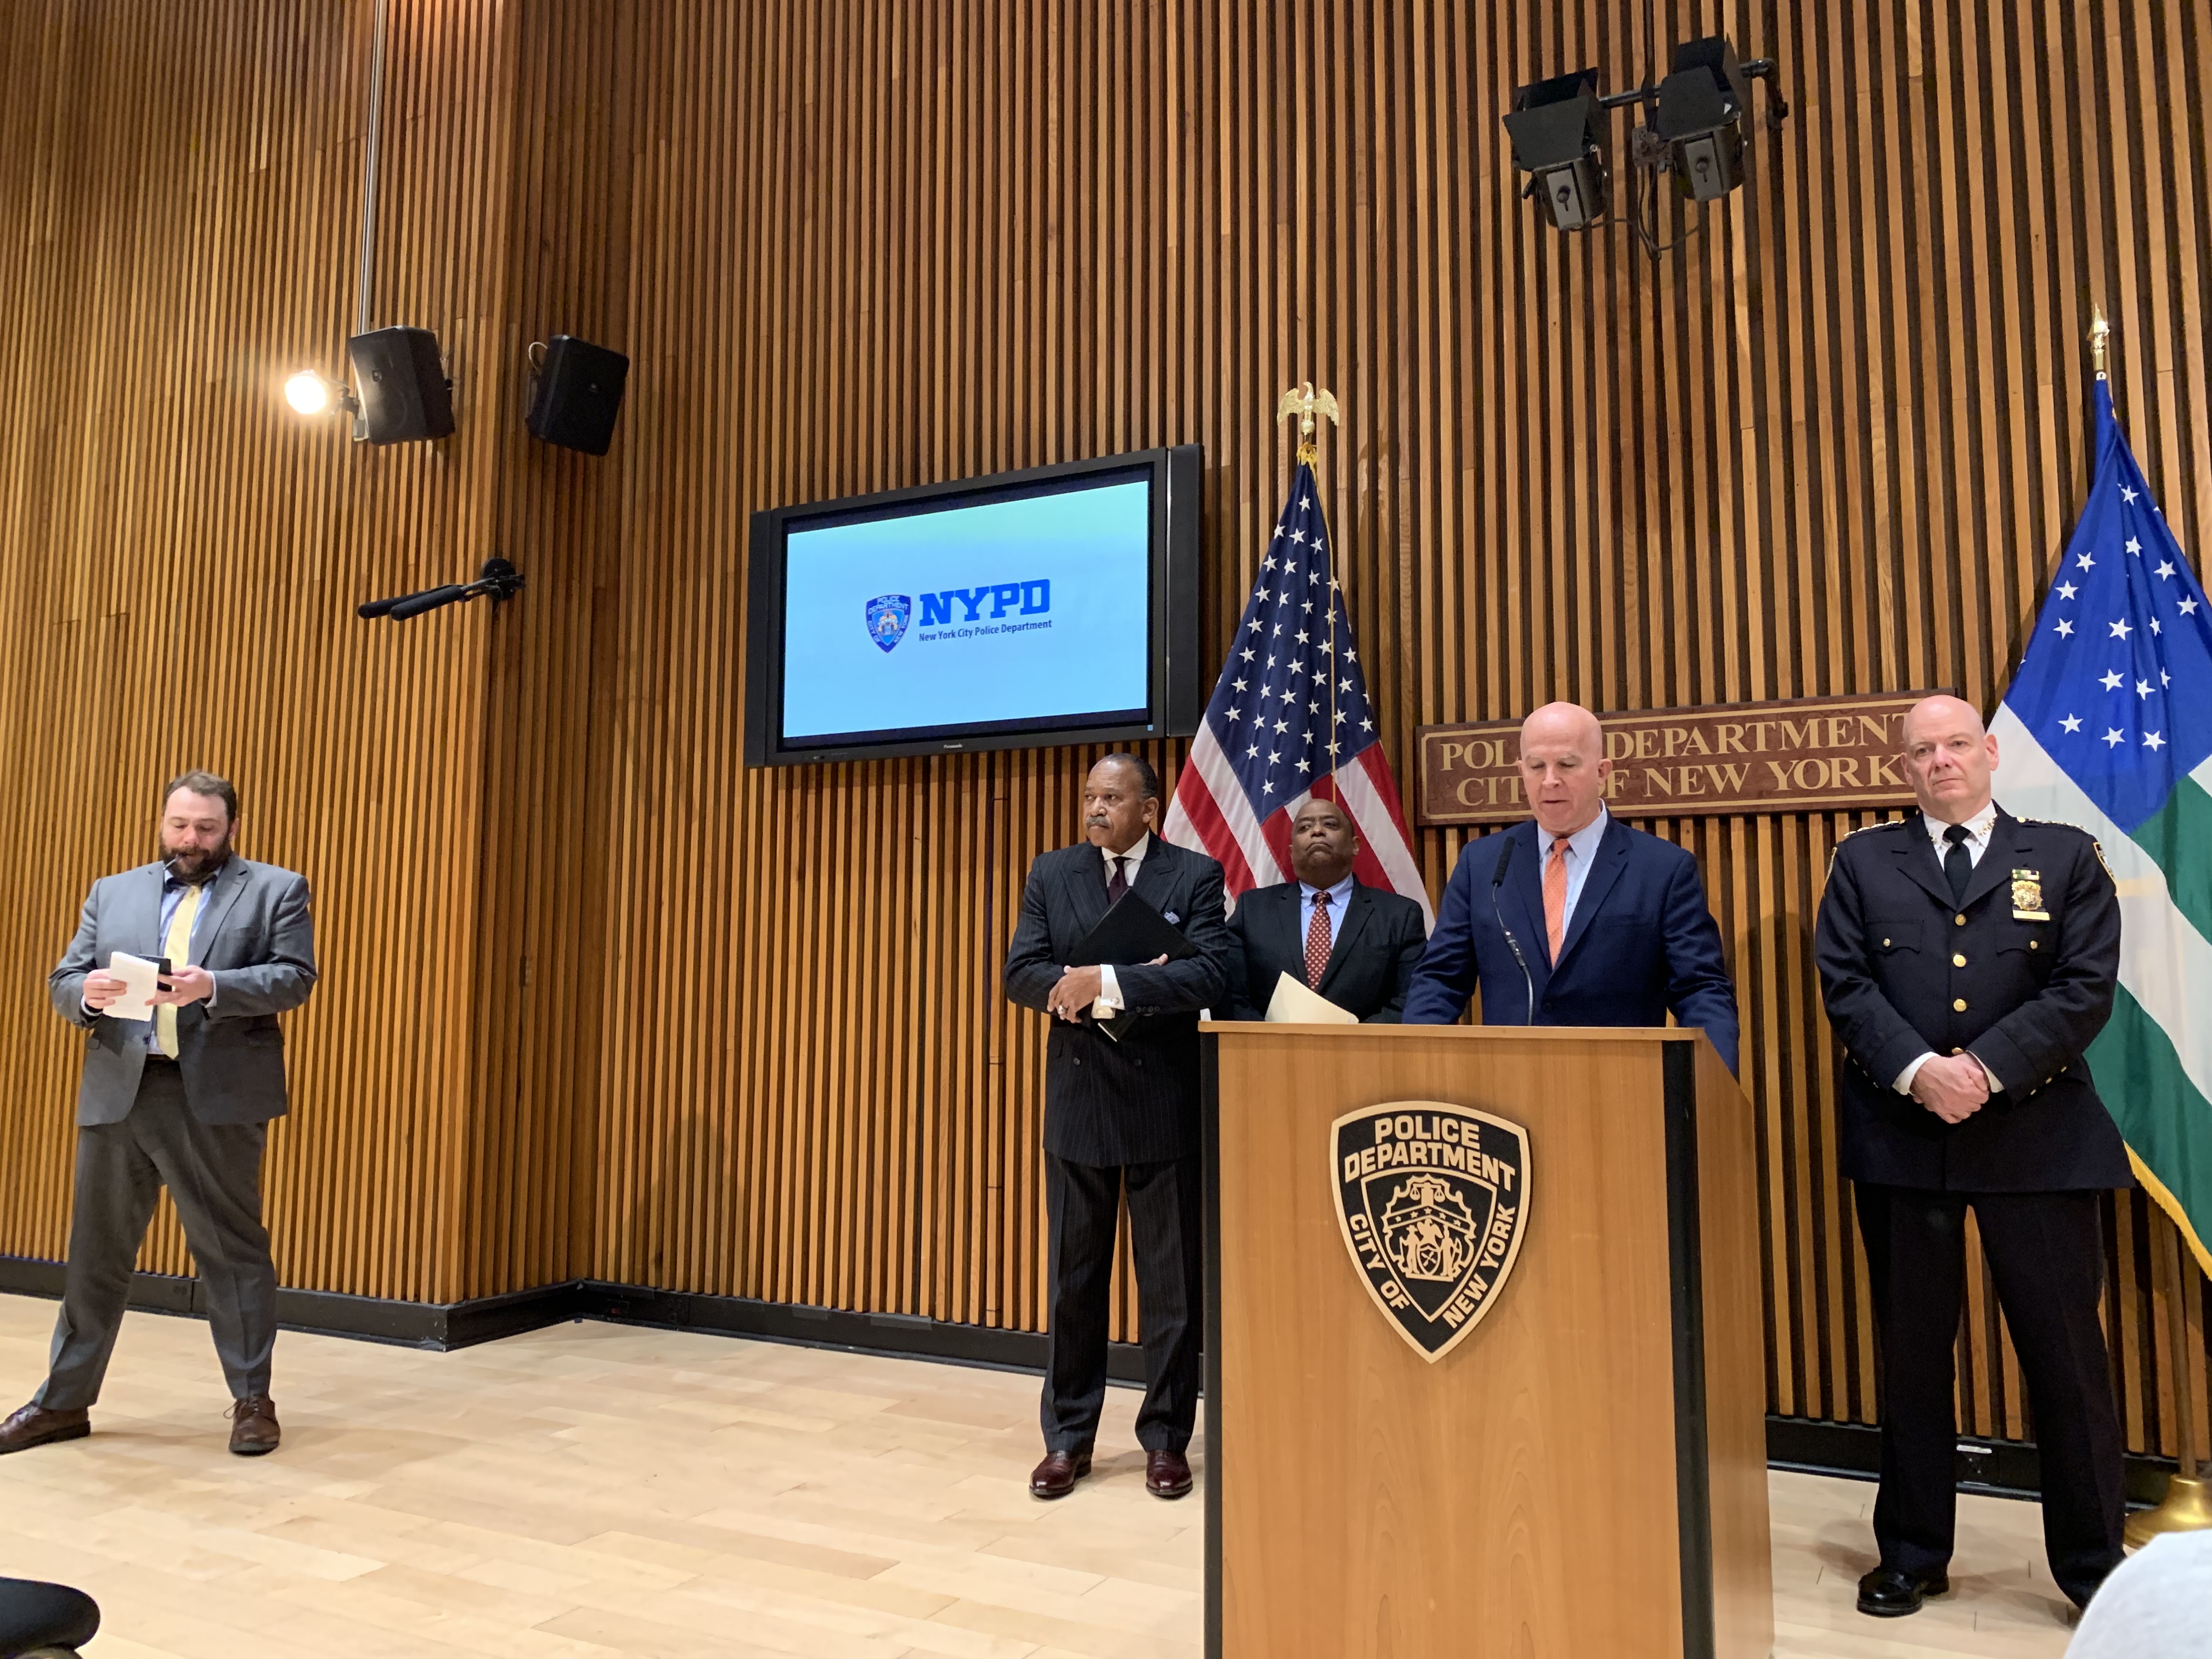 NYPD Commissioner James P. O’Neill addresses reporters at a press conference at police headquarters Monday. Eagle photo by Noah Goldberg